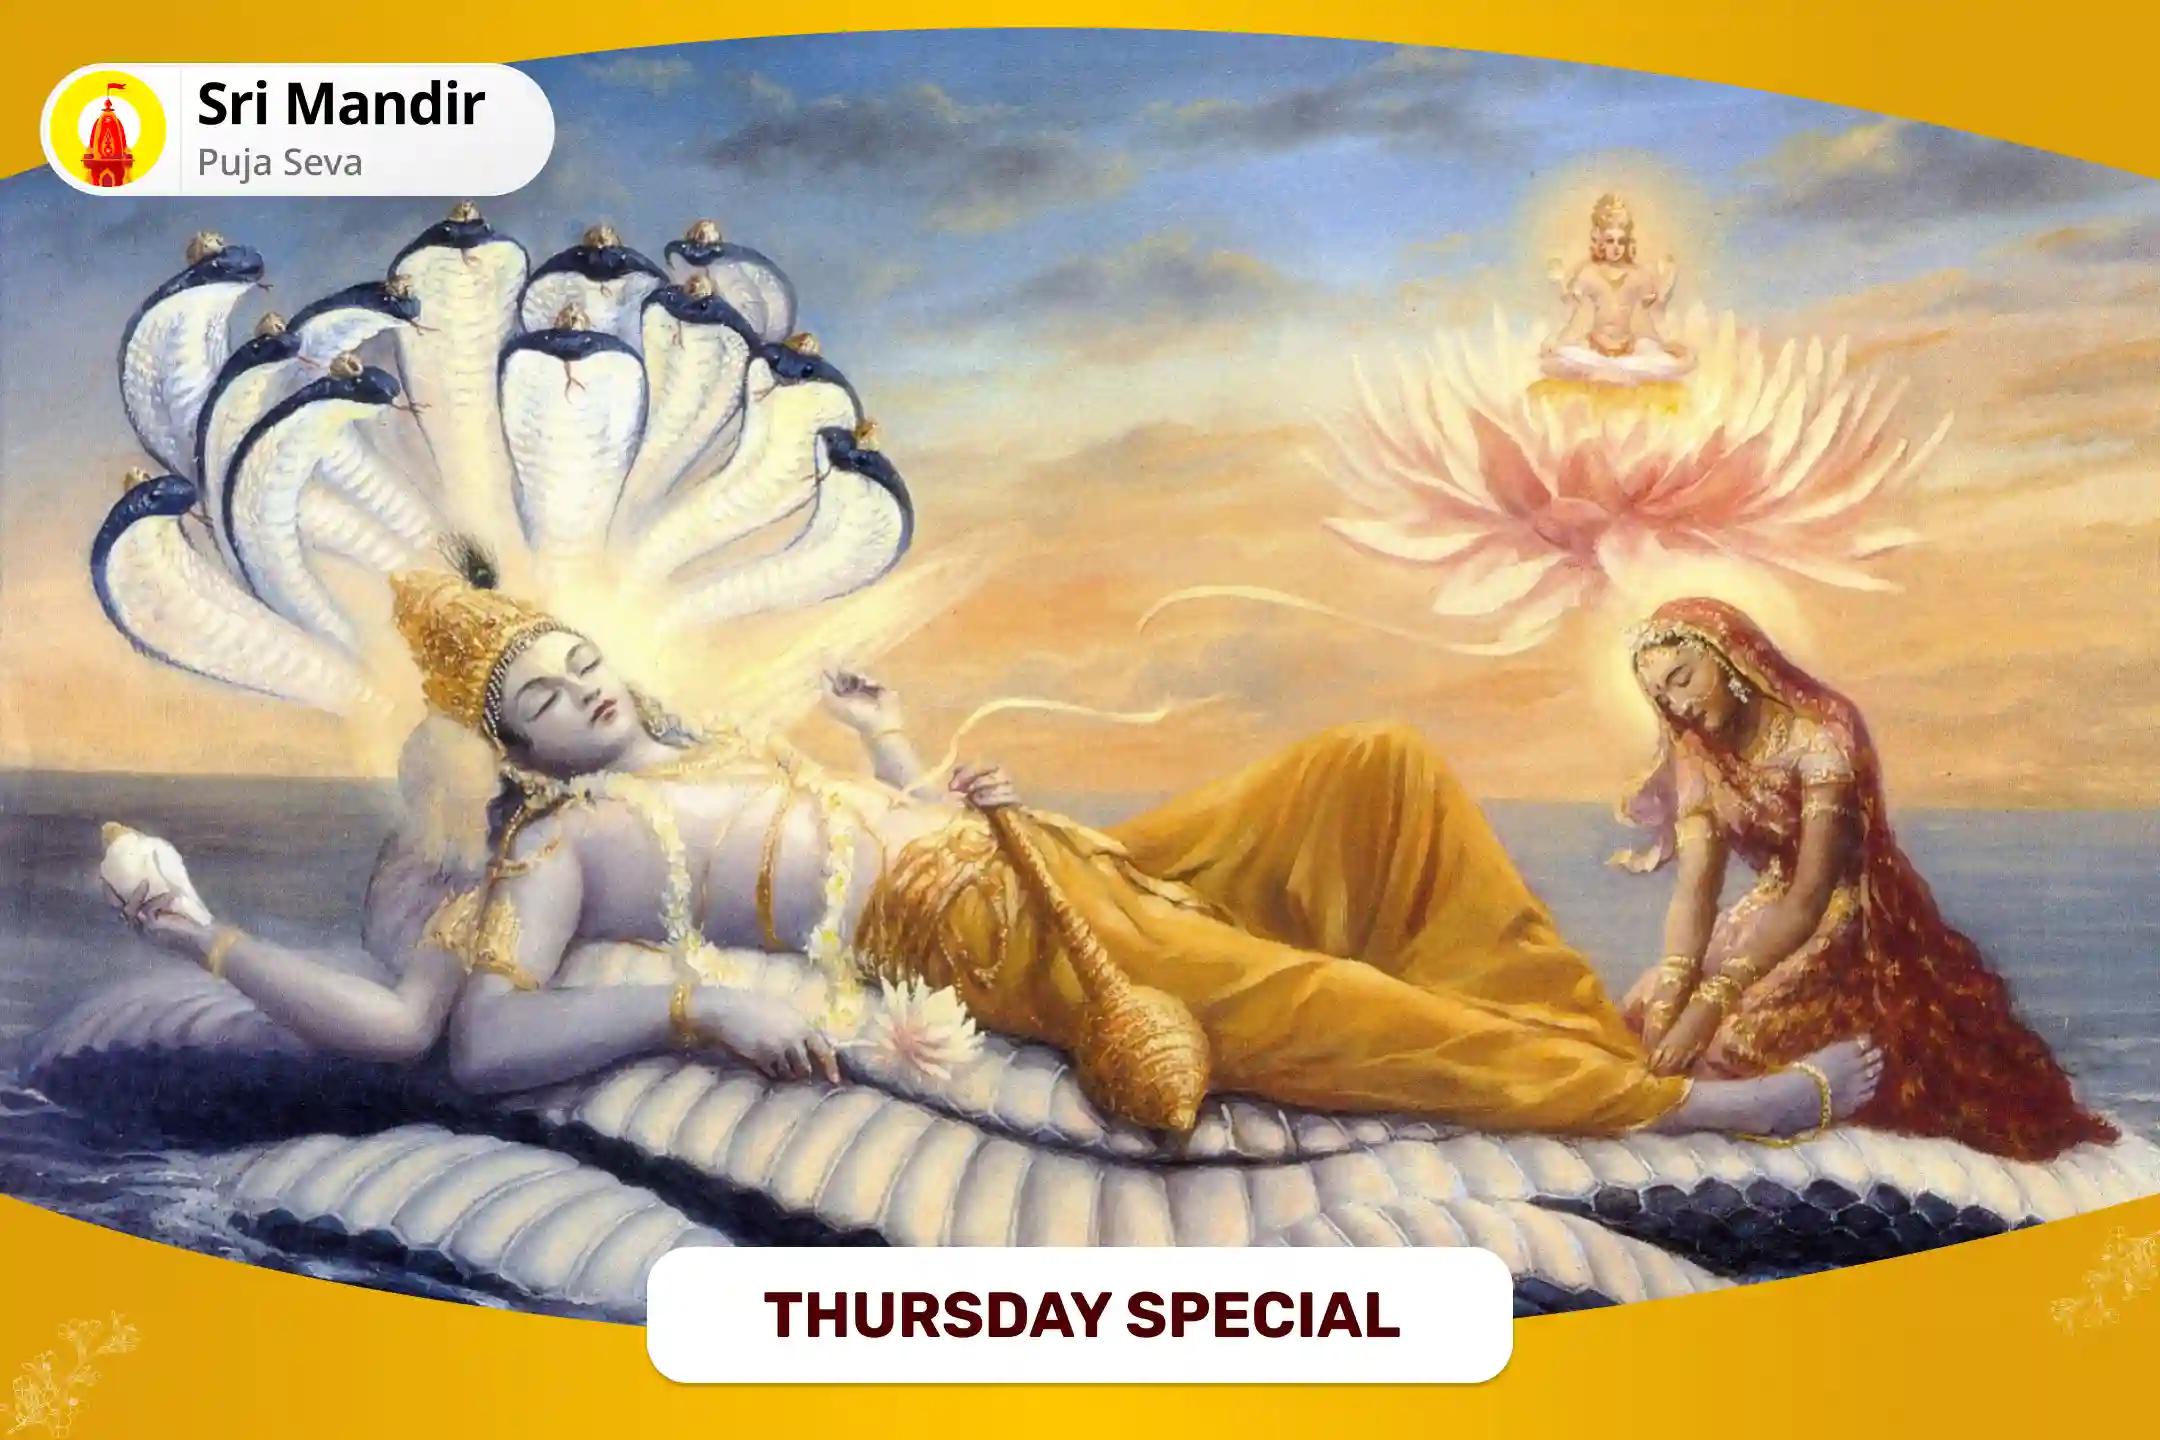 Thursday Special Vishnu Sudarshan Havan and Sahasranama Path for Promoting Stability and Prosperity in Life